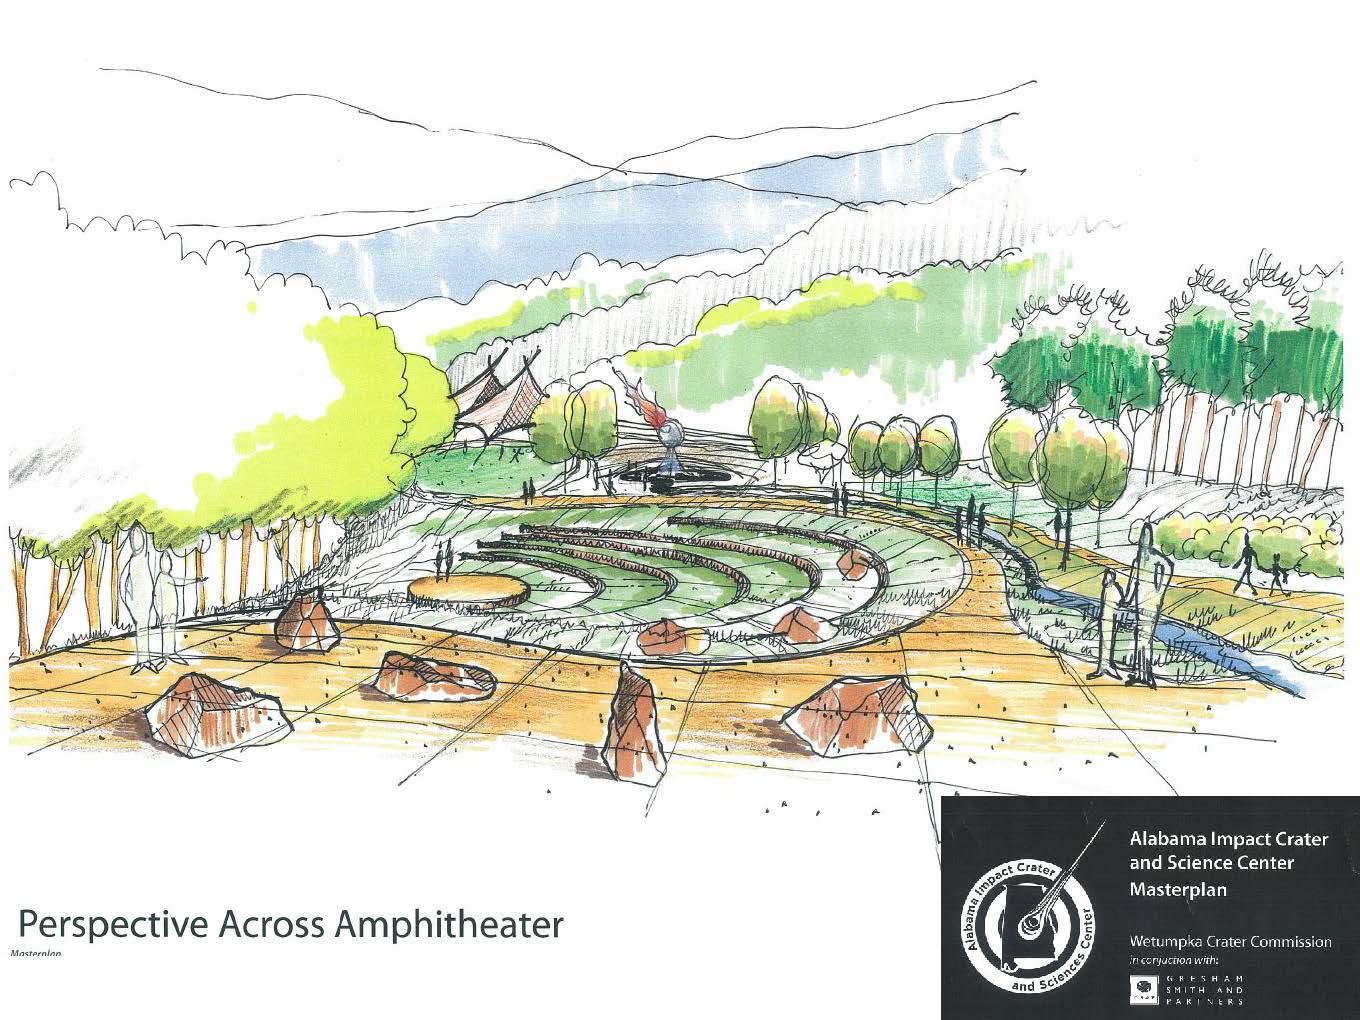 rendering of the plans for the amphitheater at the crater interpretive center section B-B